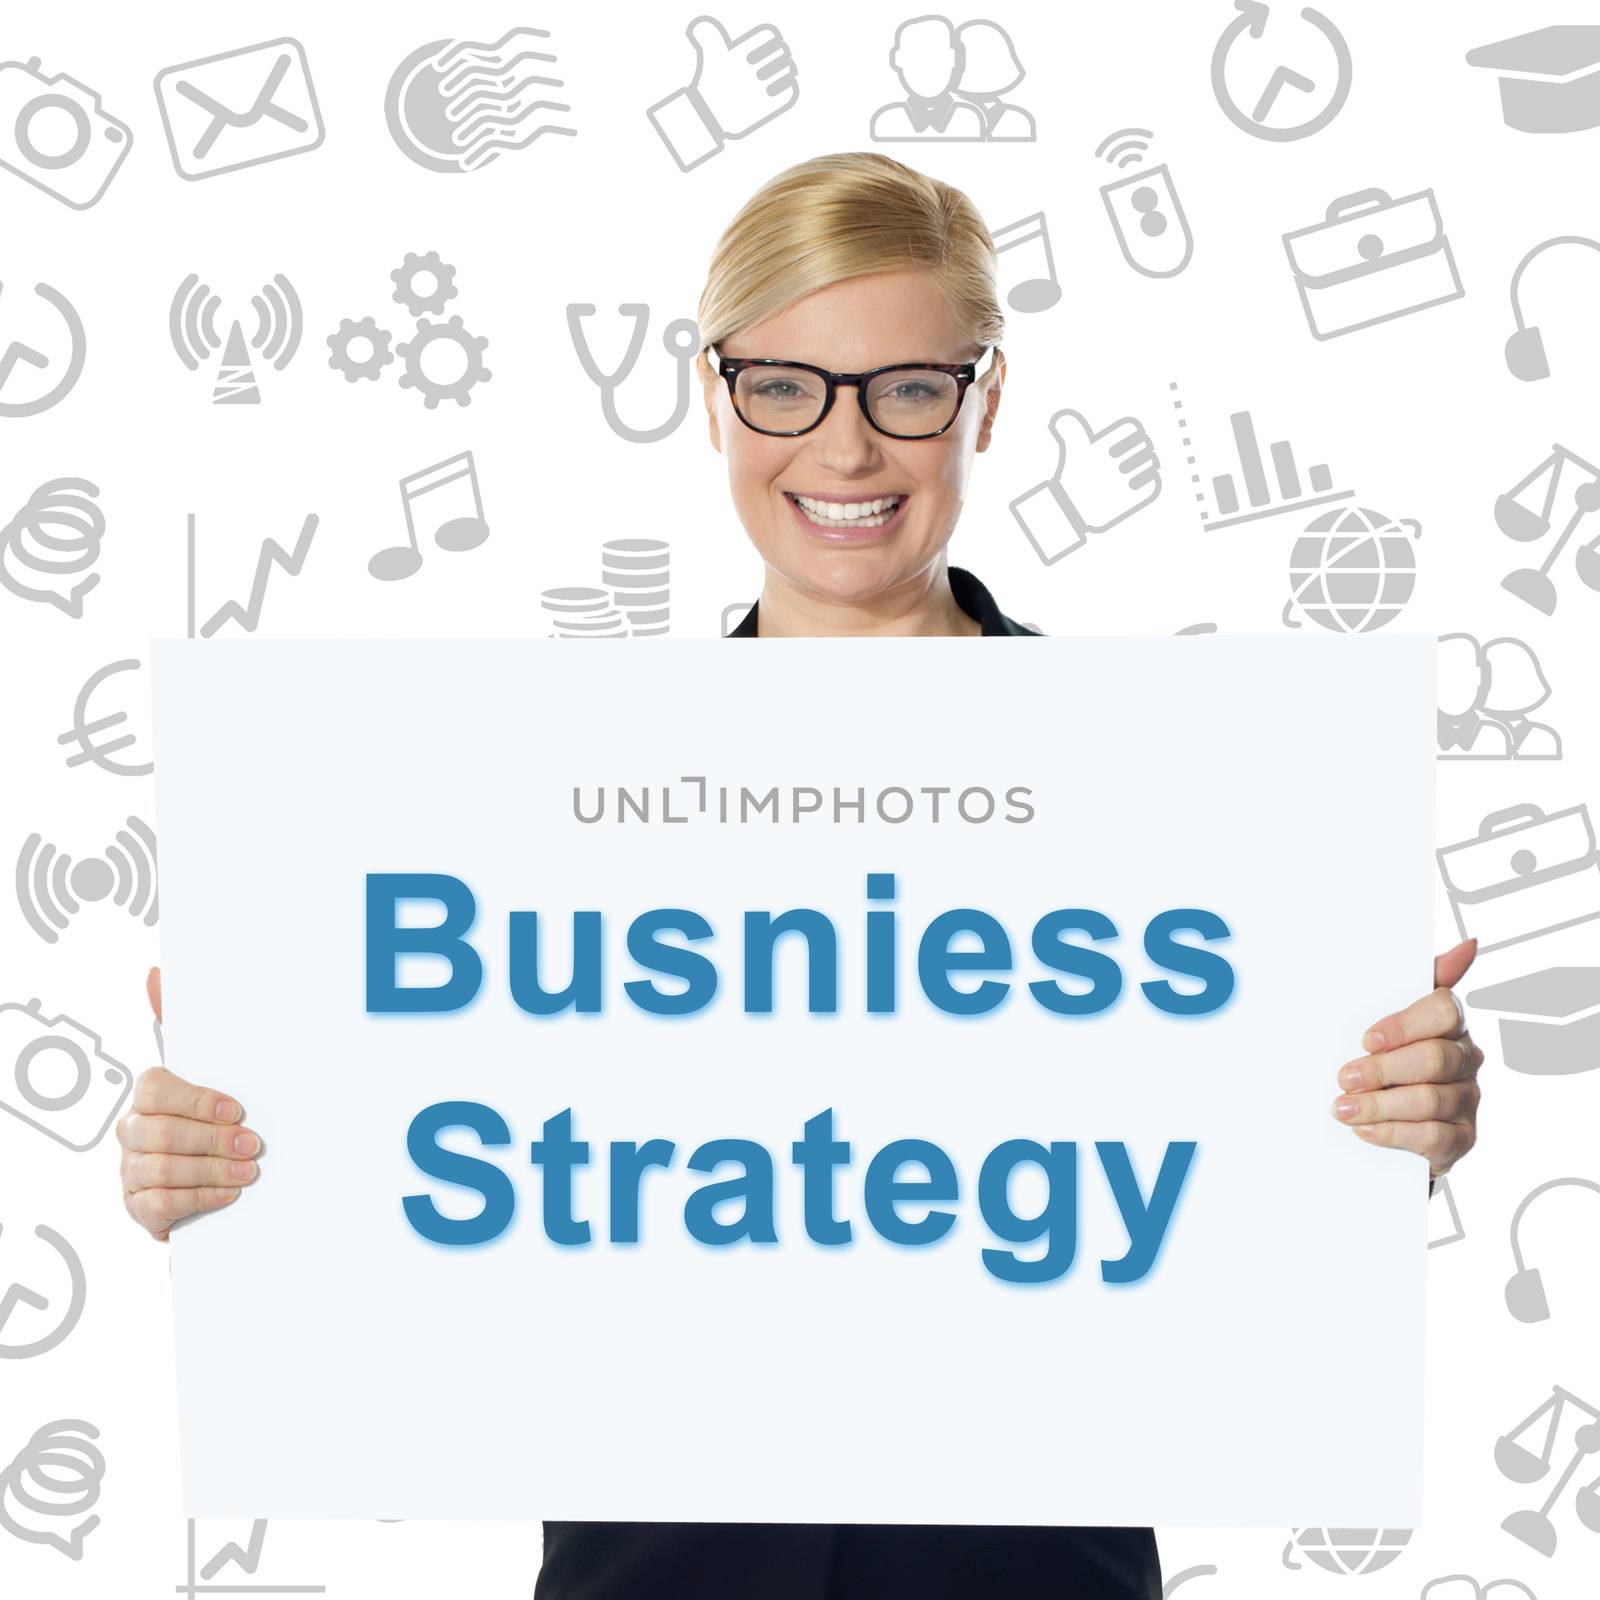 Smiling businesswoman holding business strategy banner